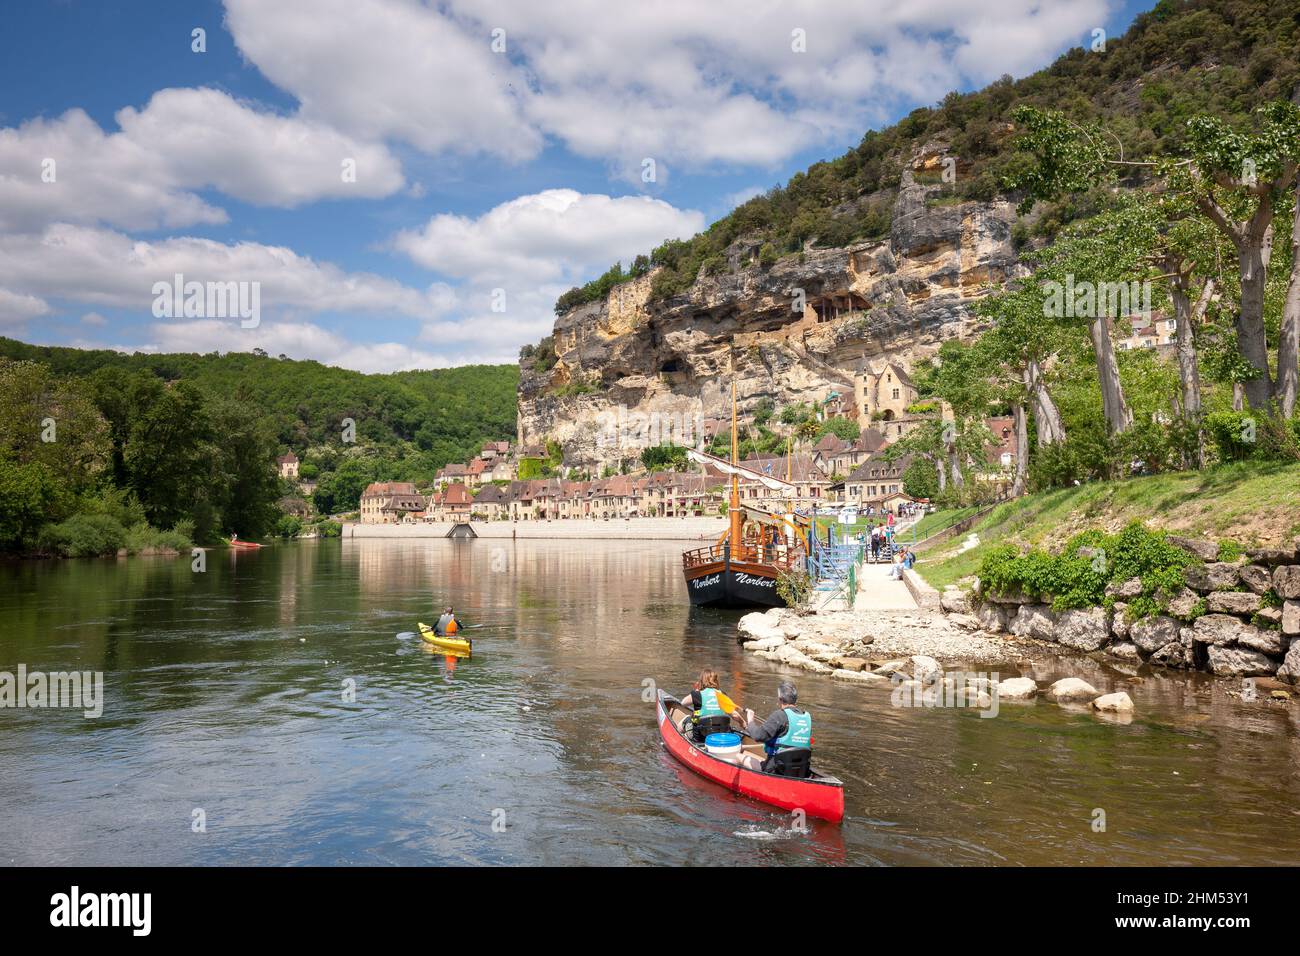 La Roque Gageac with pople canoeing ,cliffs and river boats in the summer sunshine and white clouds Dordogne France Stock Photo